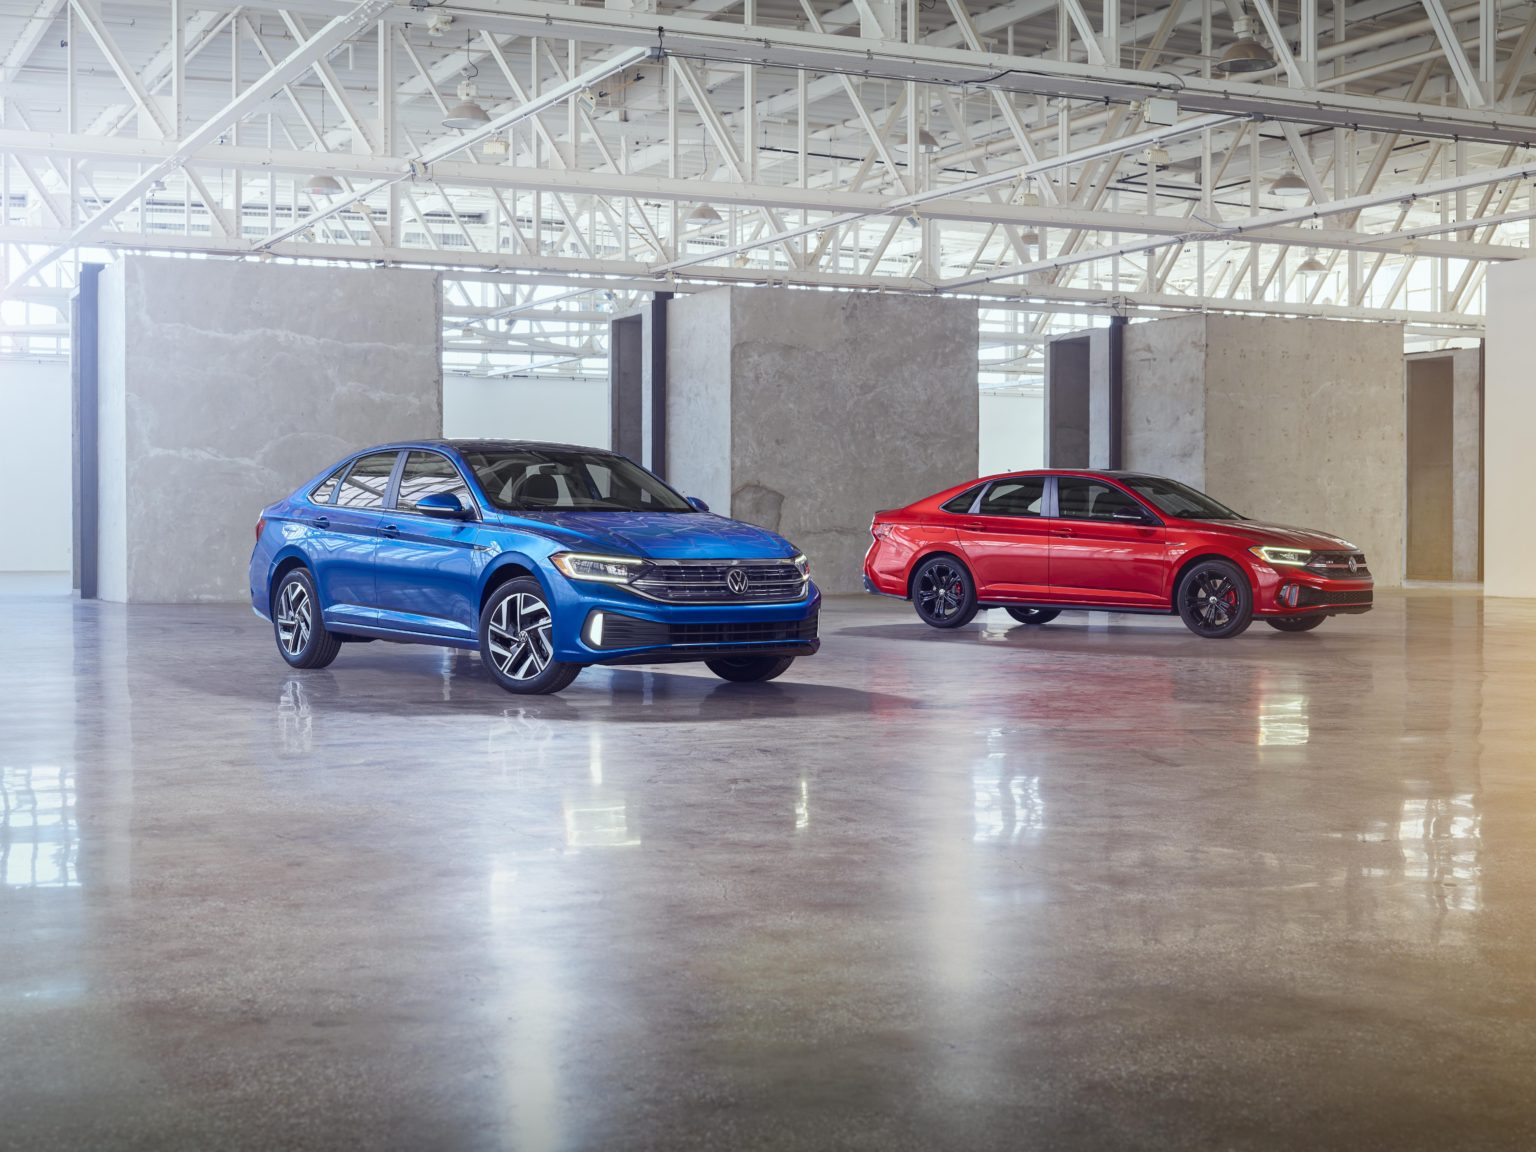 Both the Jetta and Jetta GLI are refreshed for 2022.